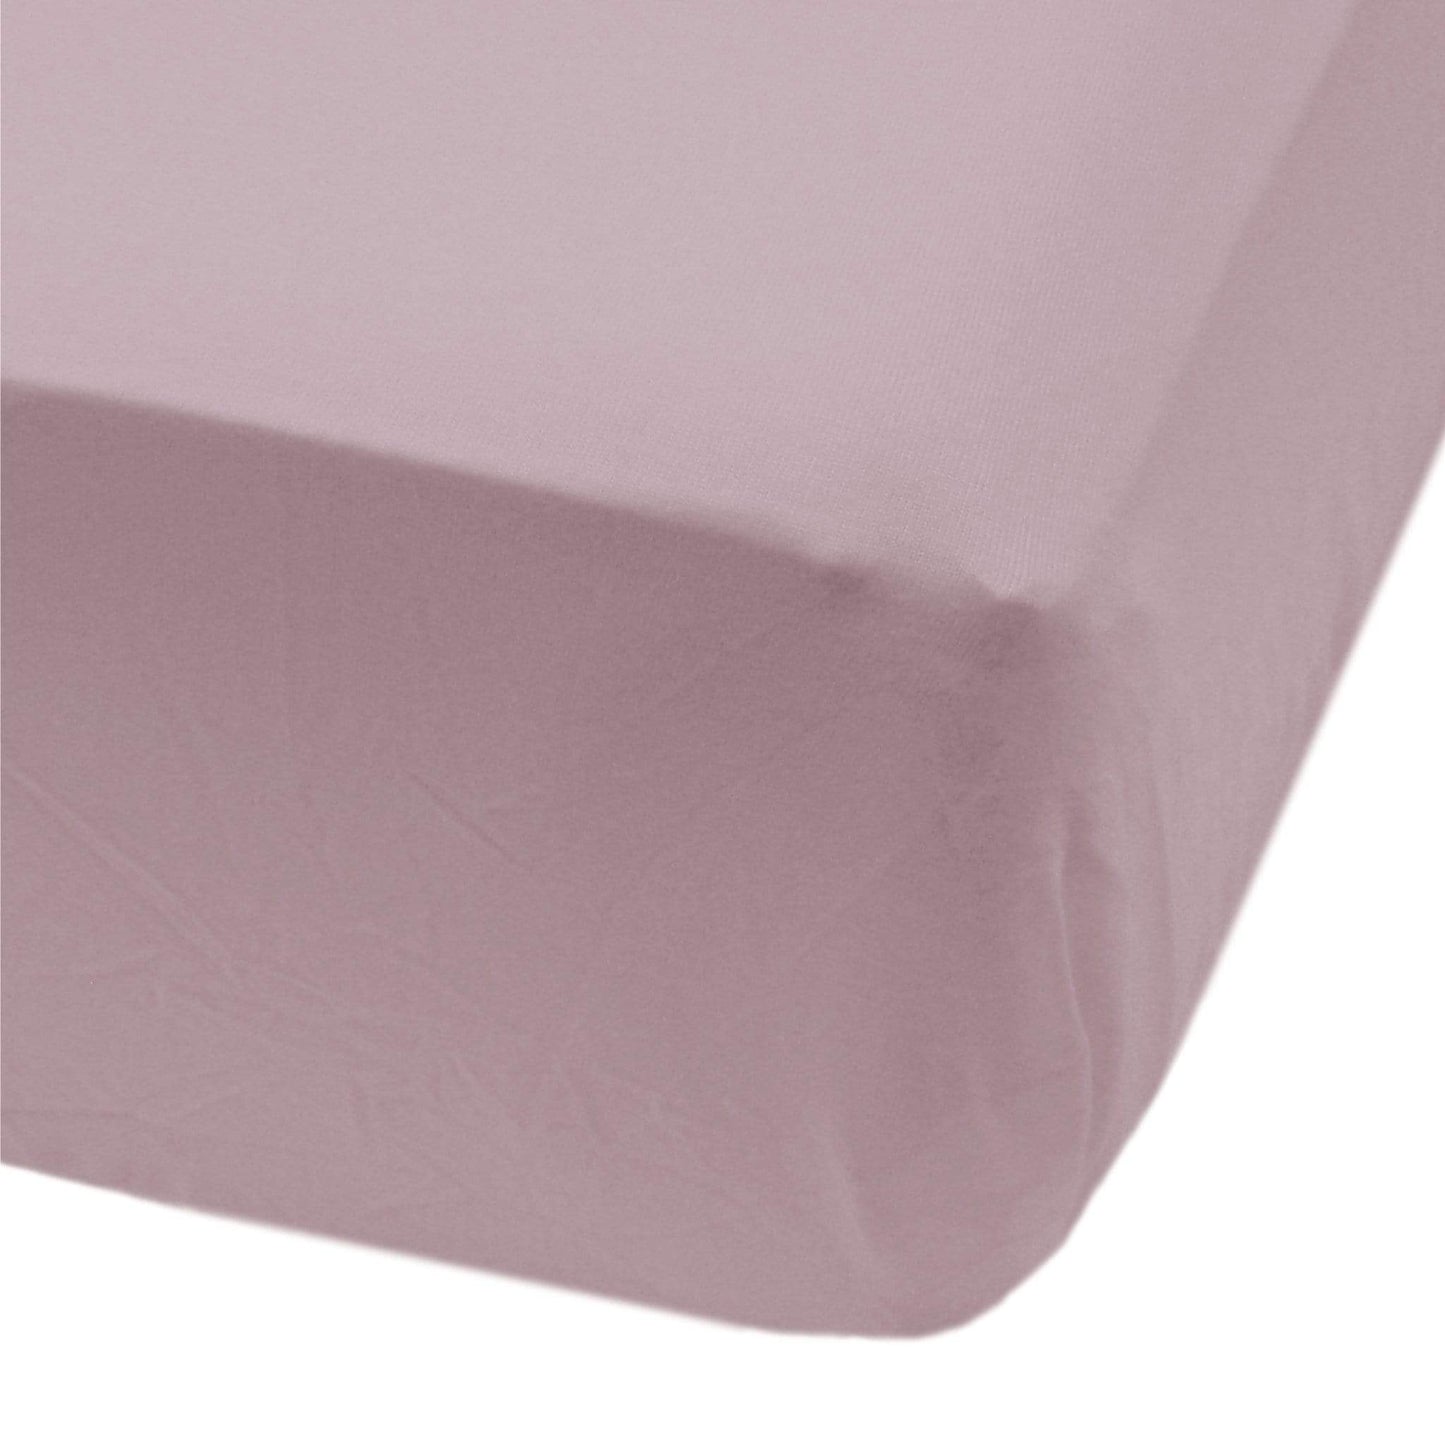 Crib fitted sheet - Plum